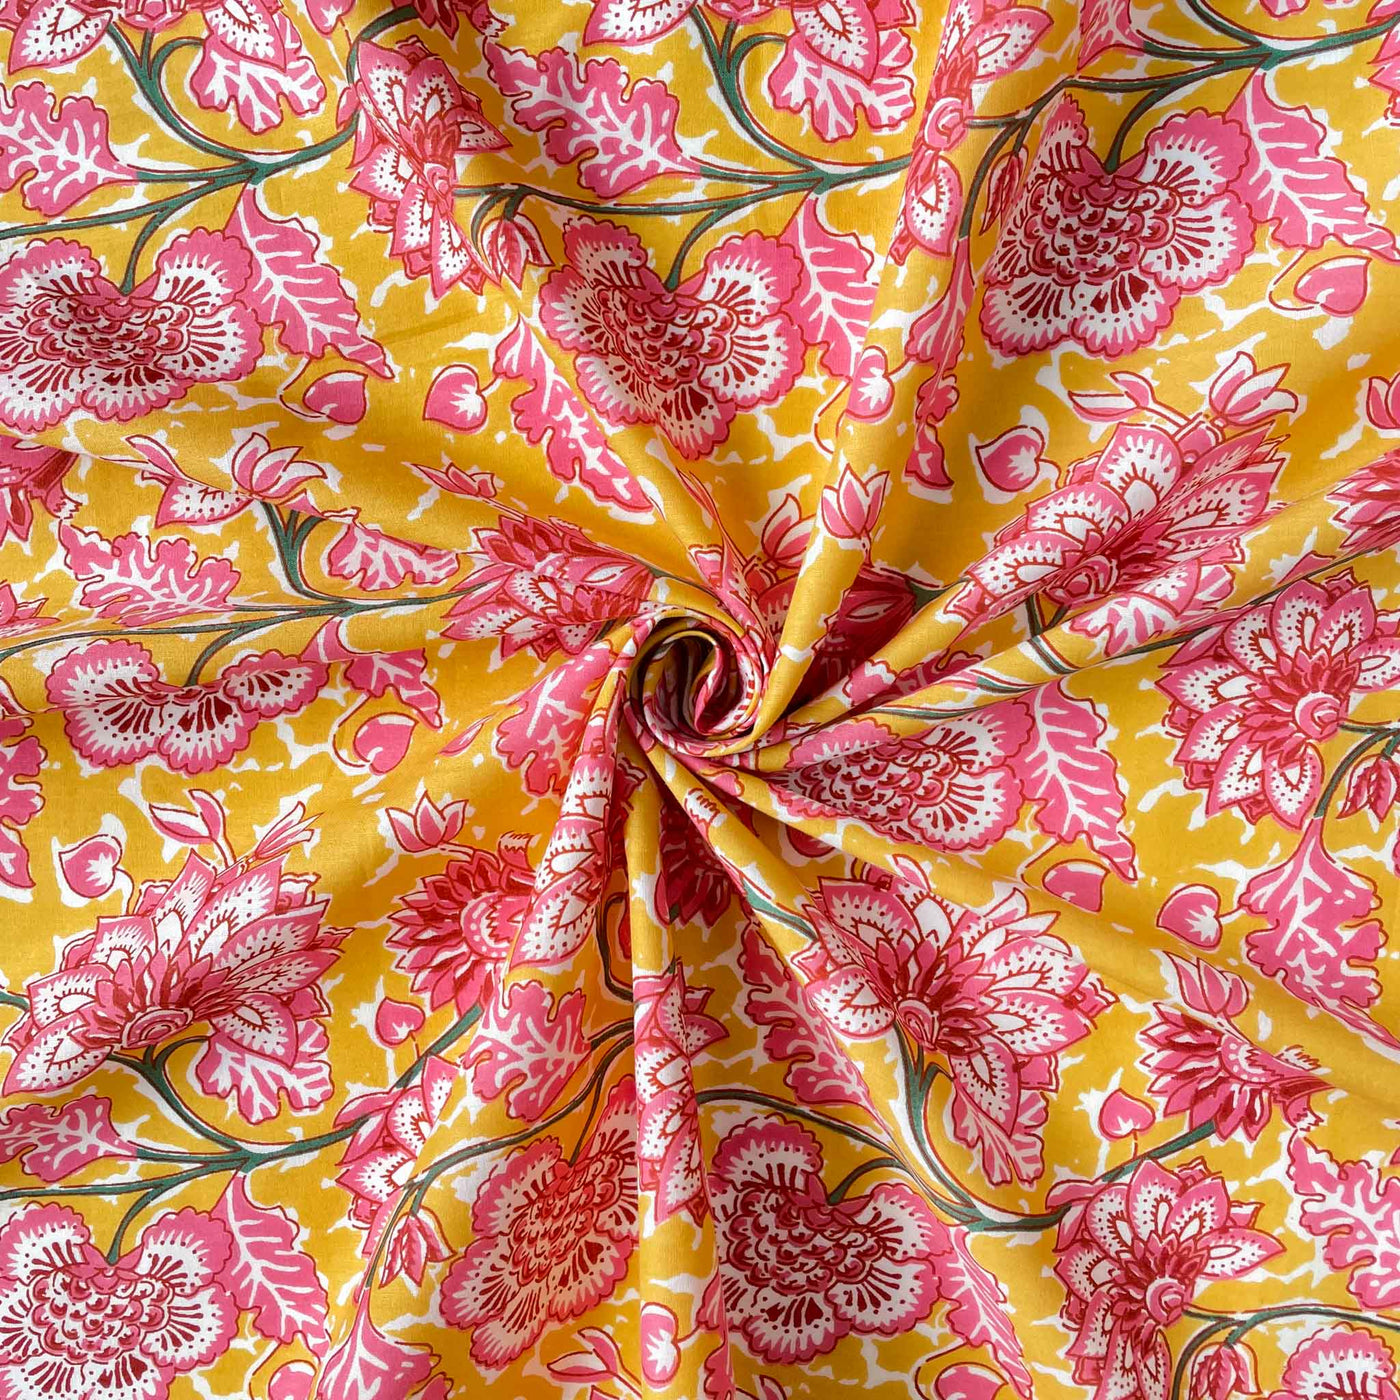 Fabric Pandit Fabric Mango Yellow & Pink Mughal Floral Vines Hand Block Printed Pure Cotton Cambric Fabric (Width 42 Inches)